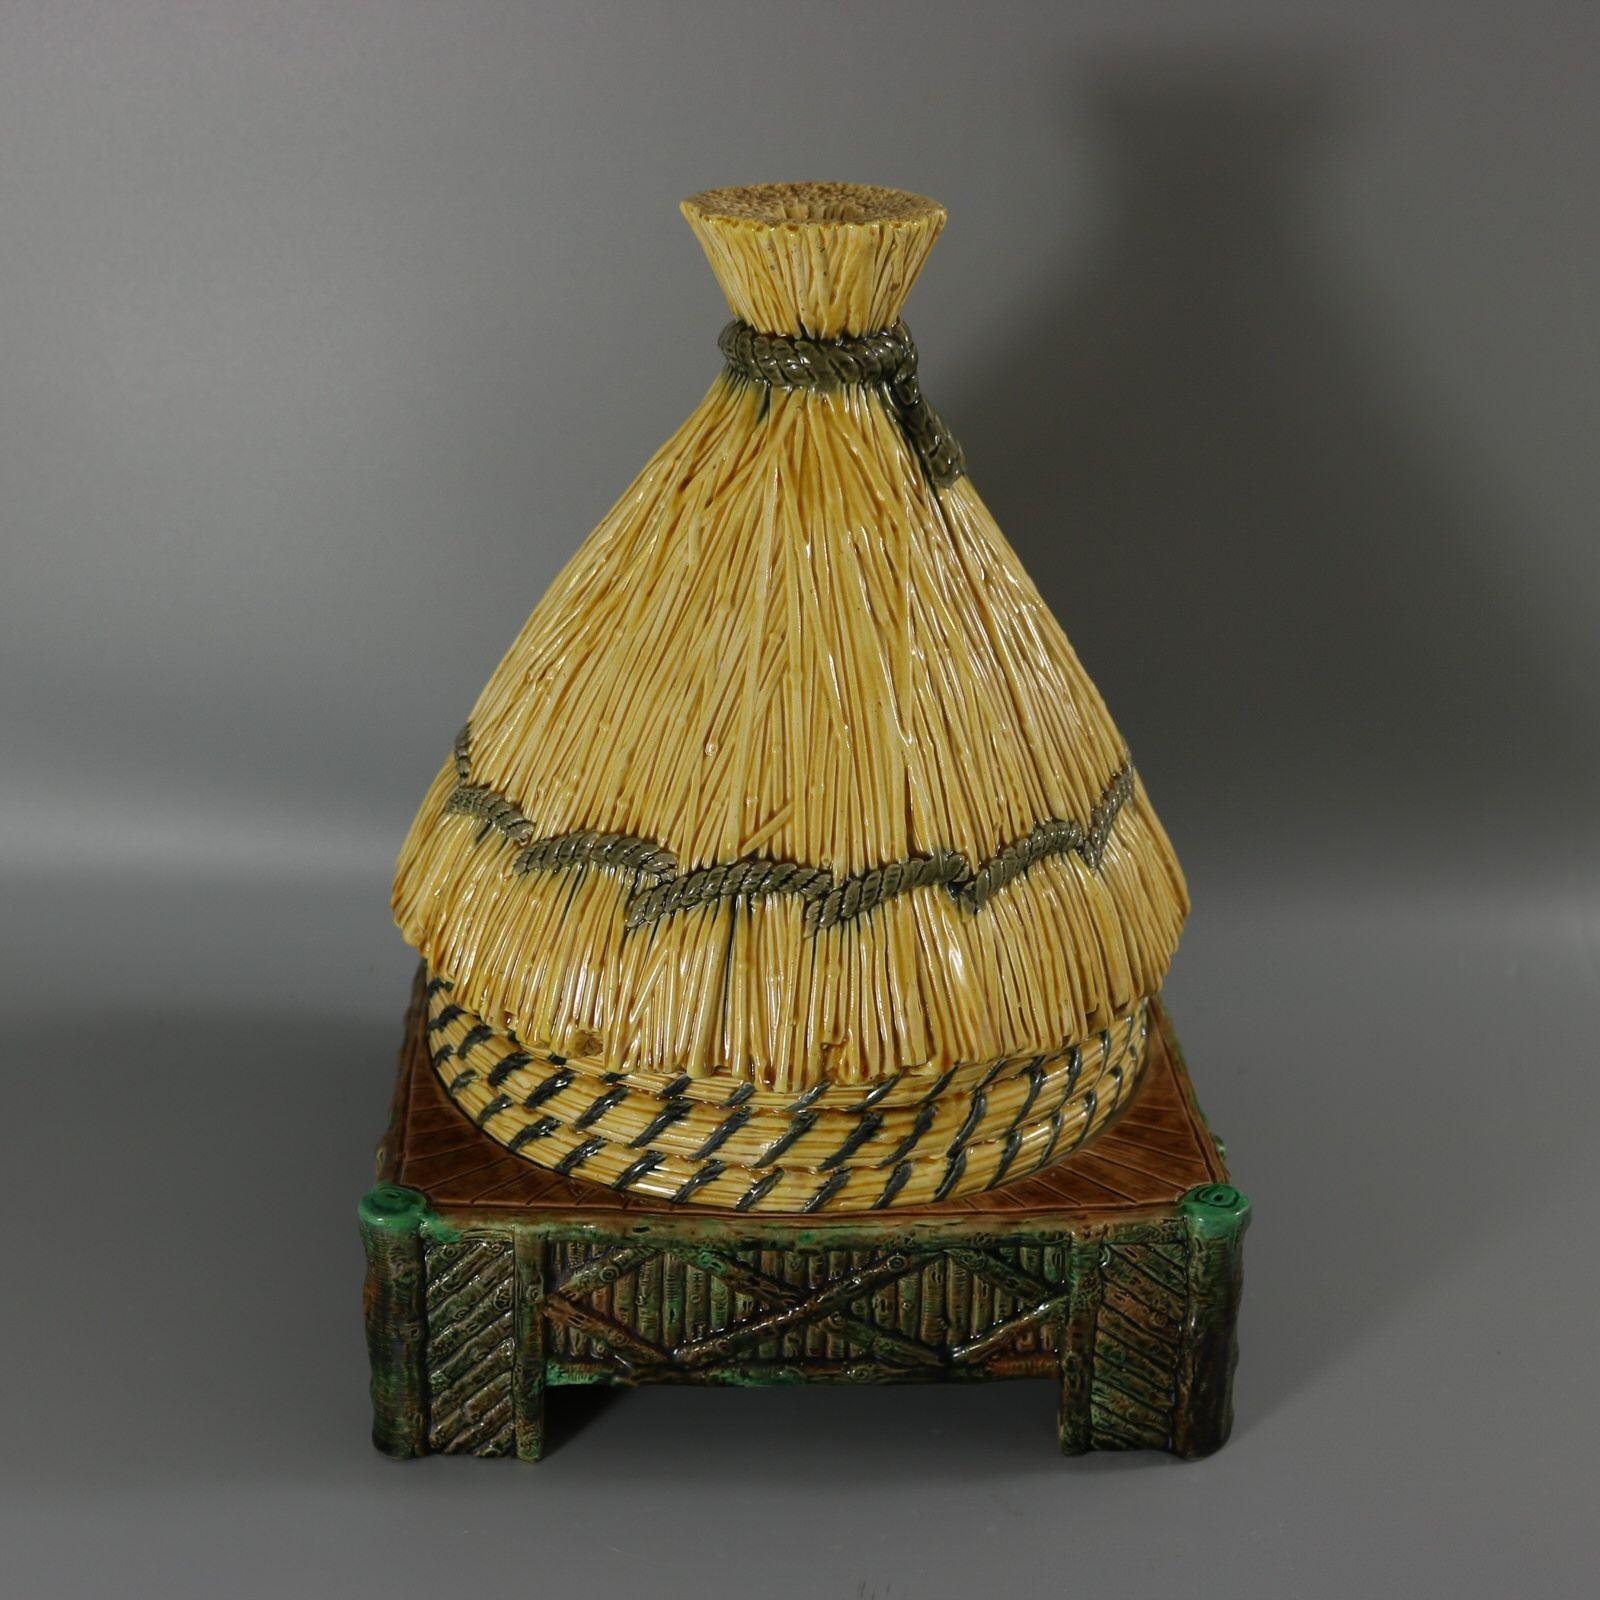 George Jones Thatched Beehive Cheese Keeper For Sale 1